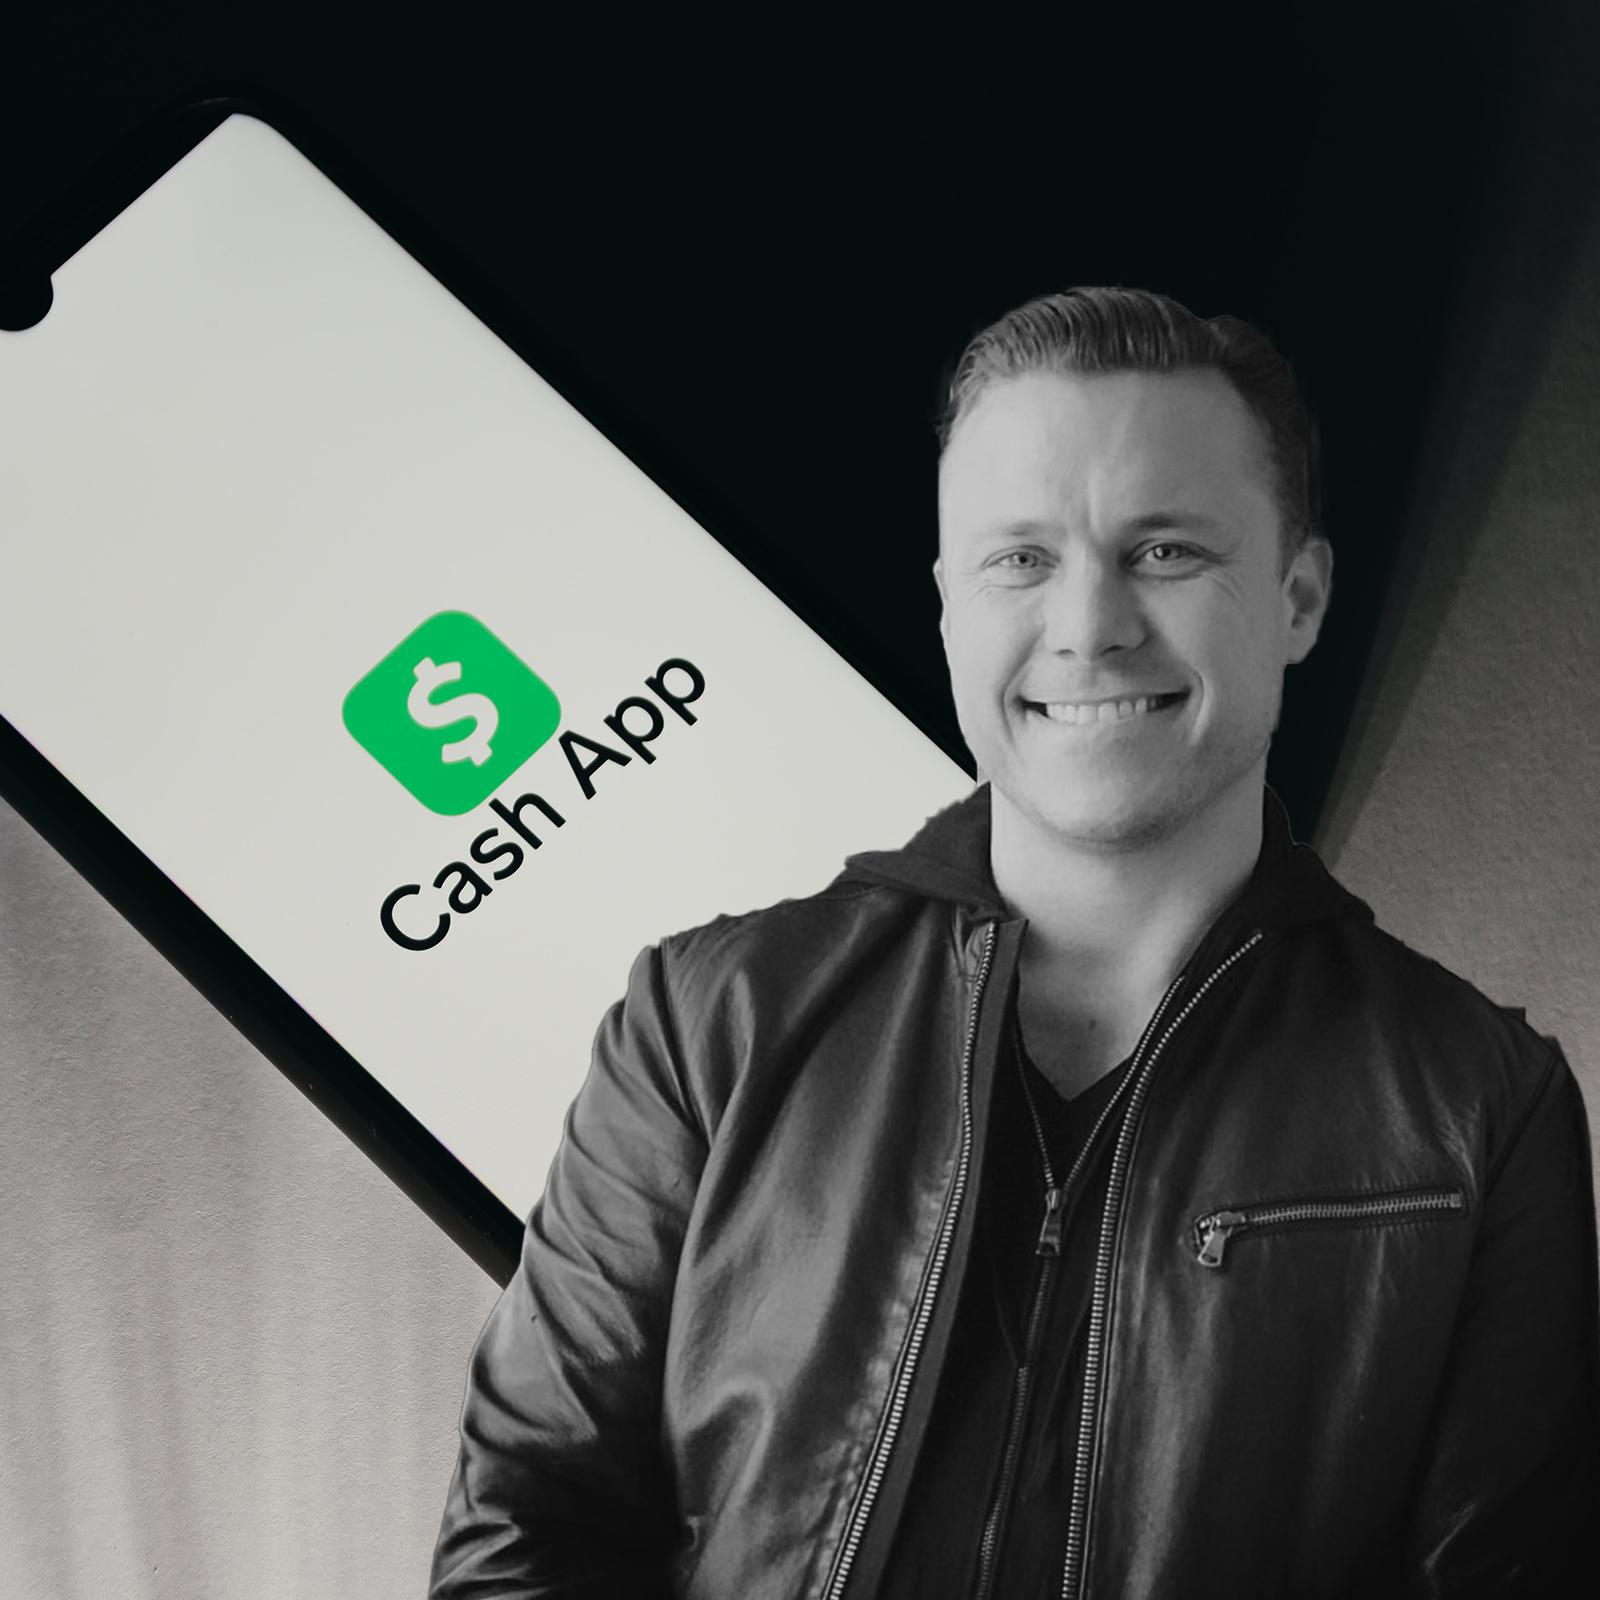 Bob Lee, the founder of Cash App, has been stabbed and killed in San Francisco